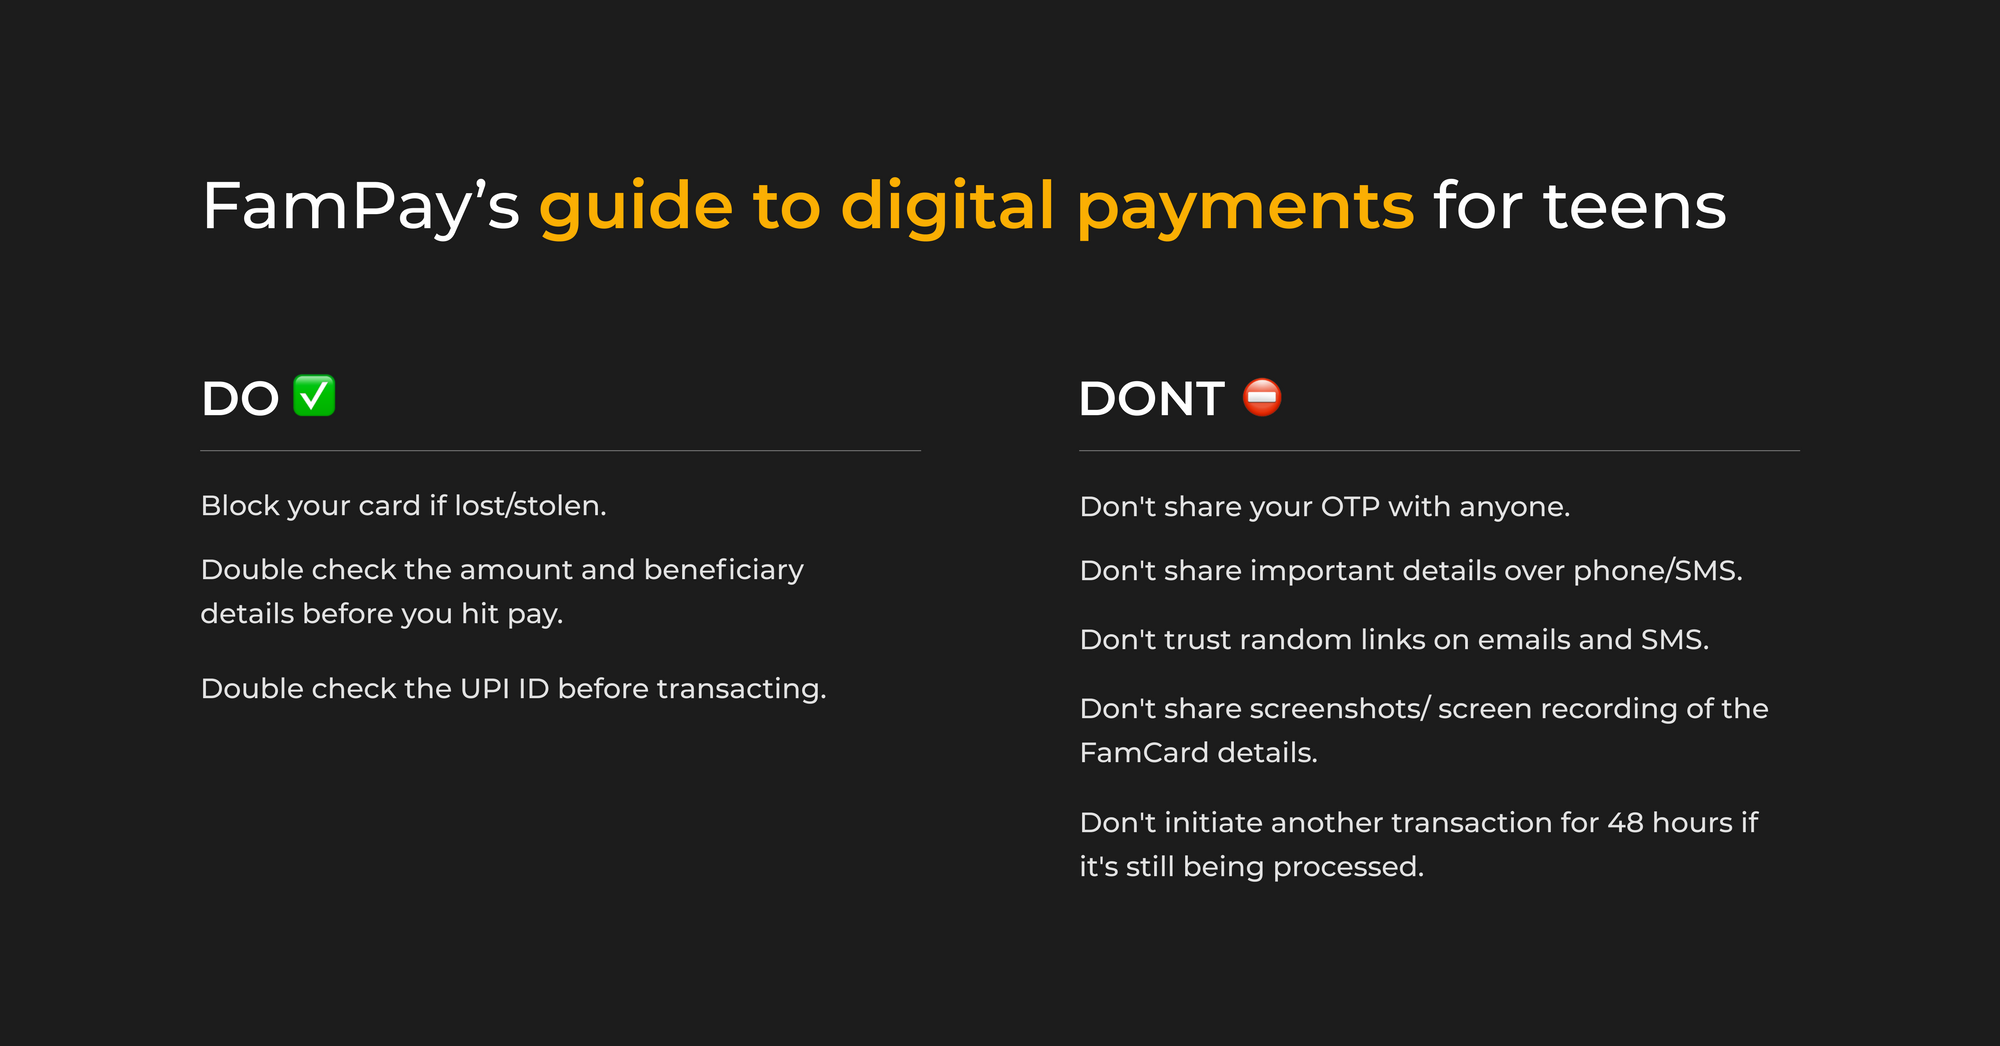 FamPay’s guide to digital payments for teens: Important Dos ✅ and Don'ts ⛔